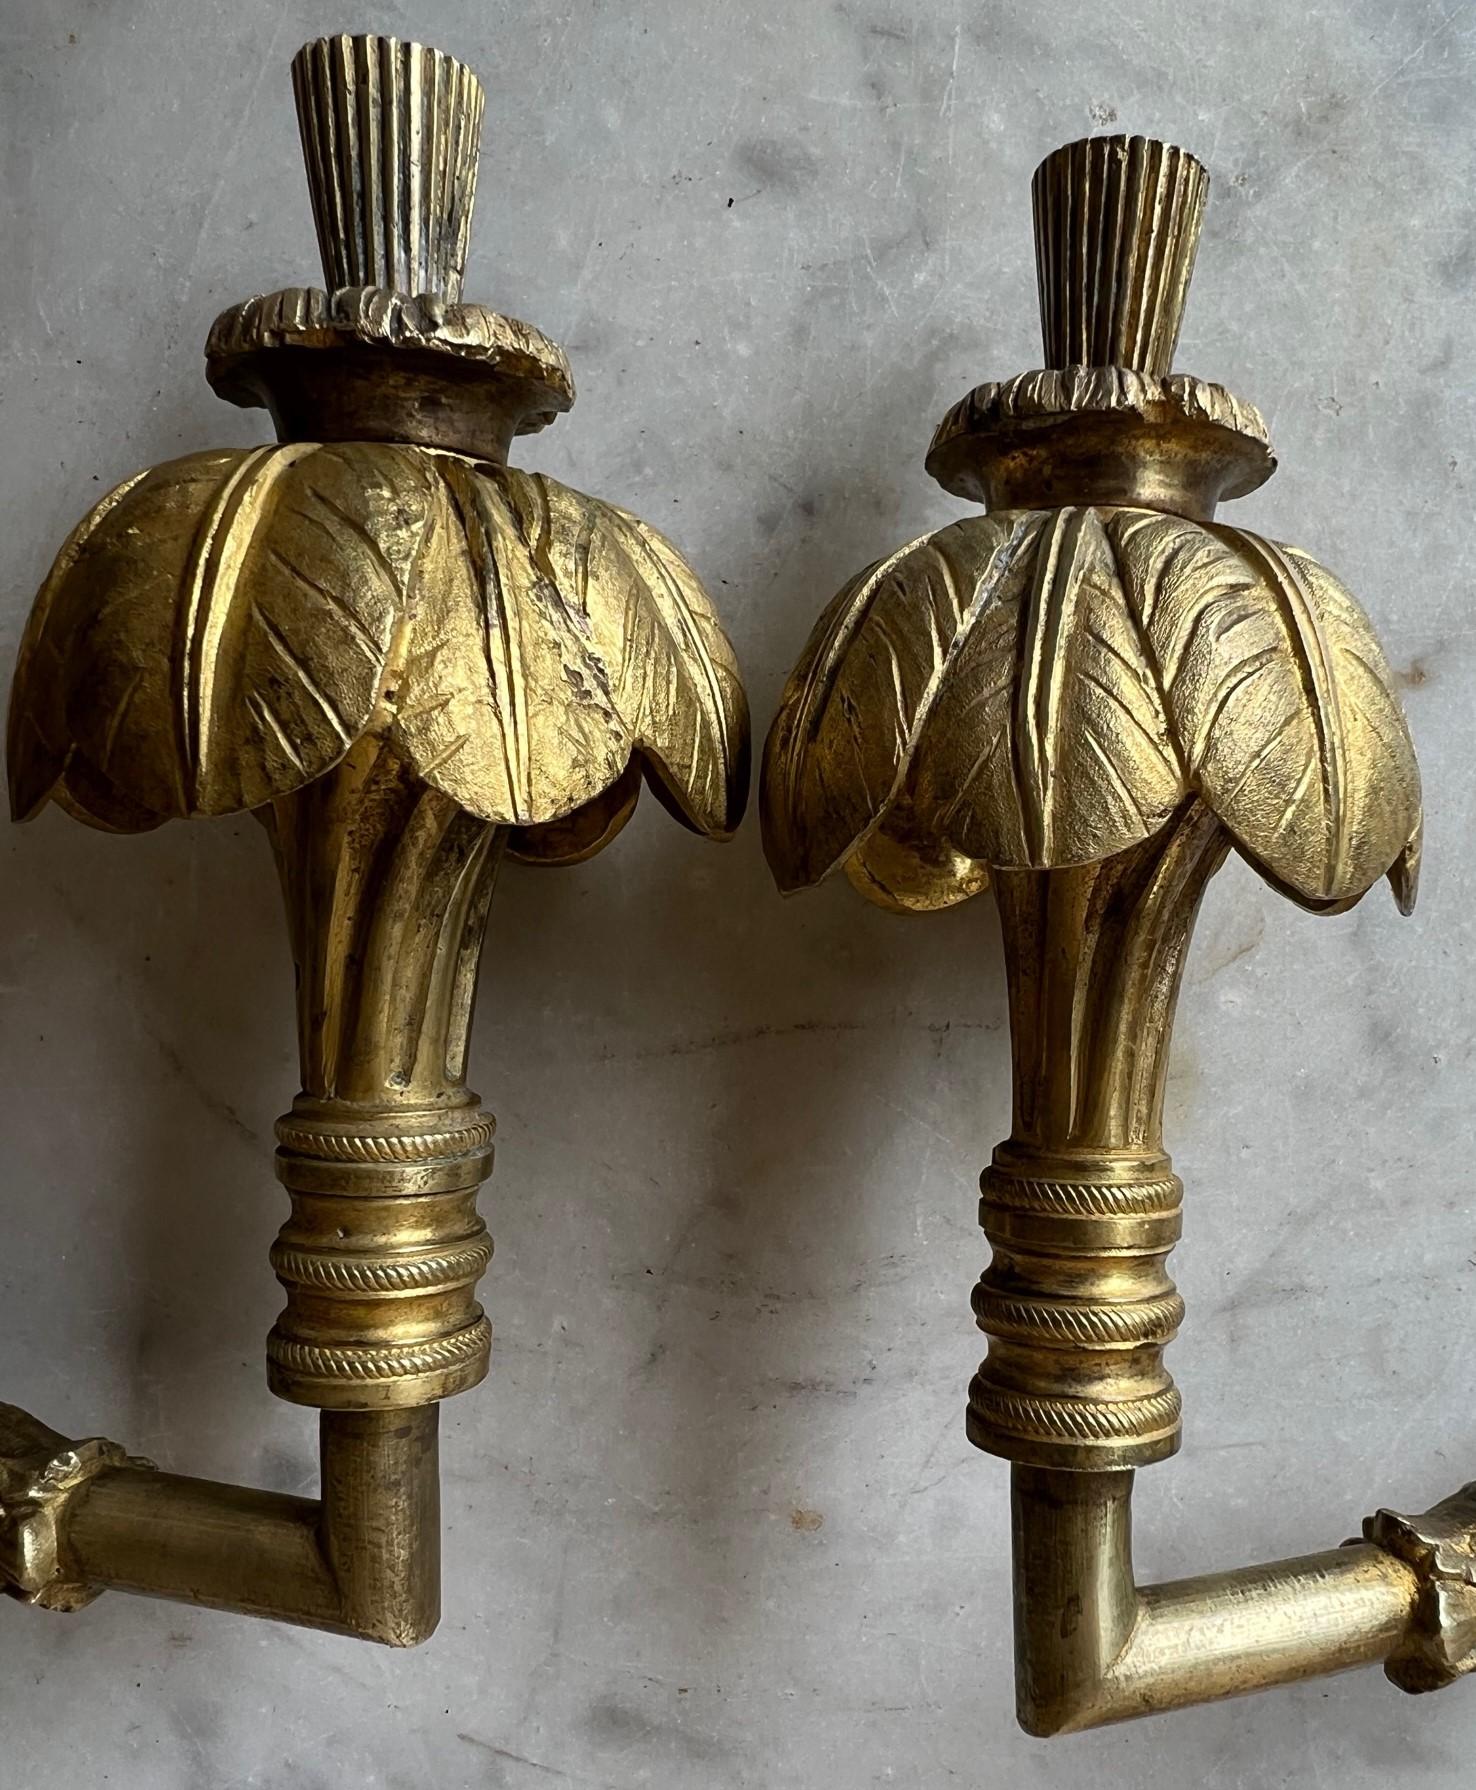 Cast Antique French Brass Curtain Tie Backs, Set of 2